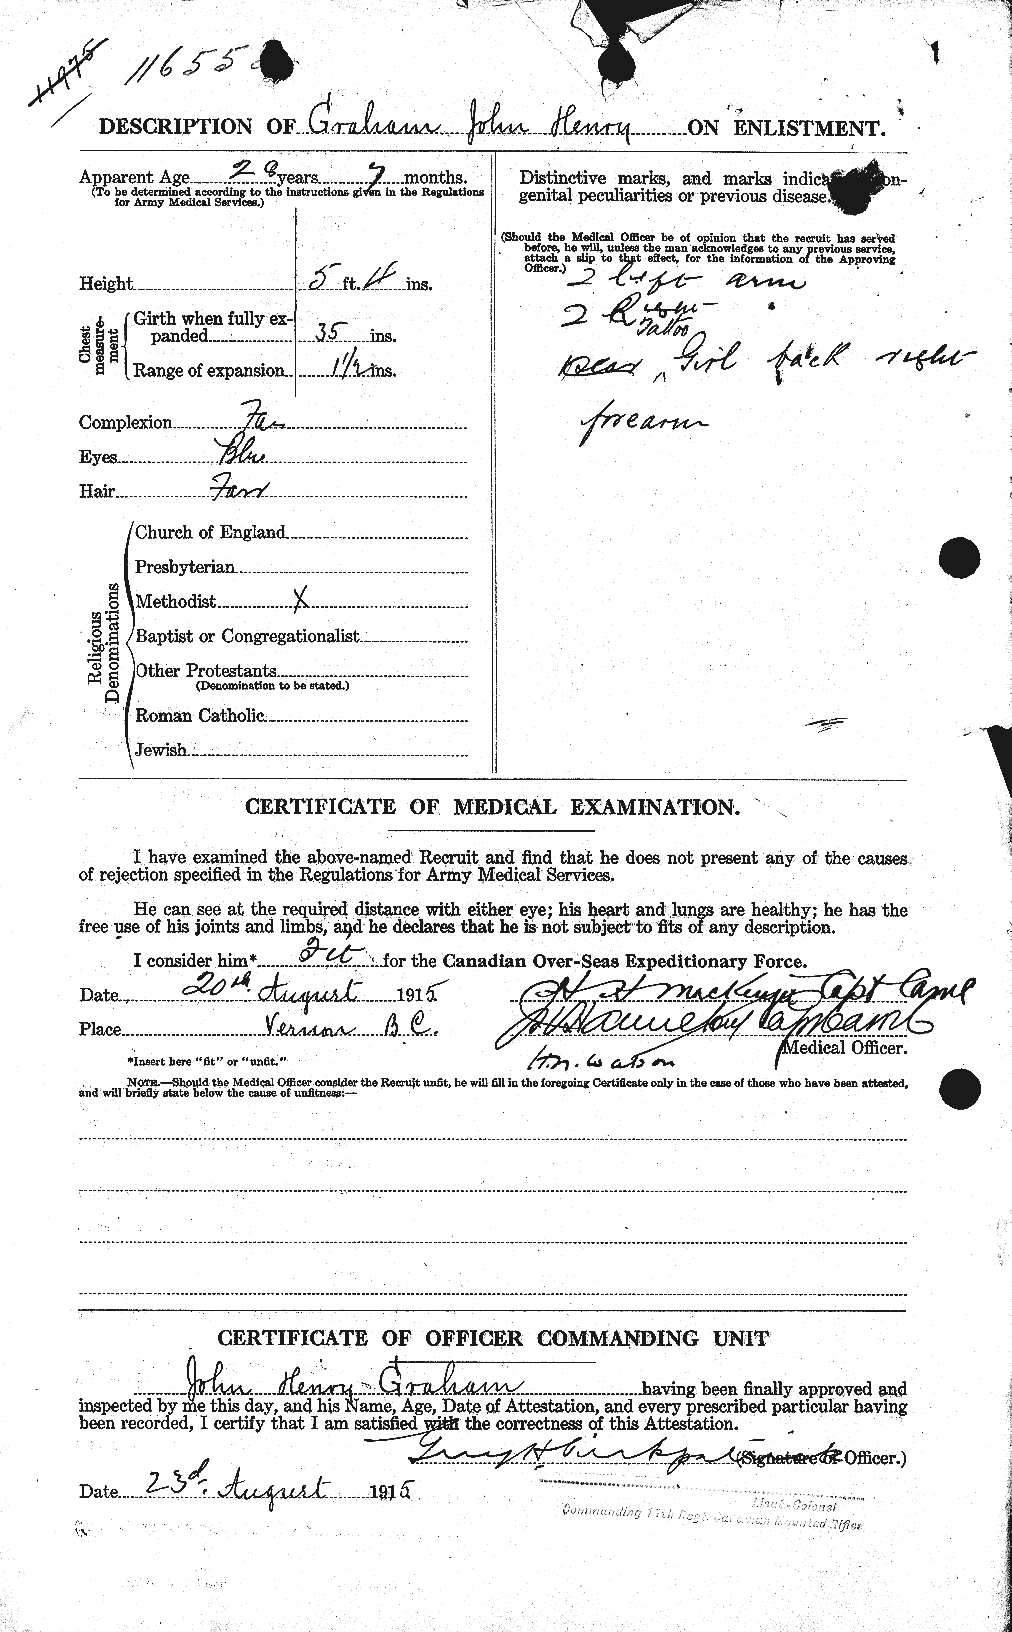 Personnel Records of the First World War - CEF 359180b